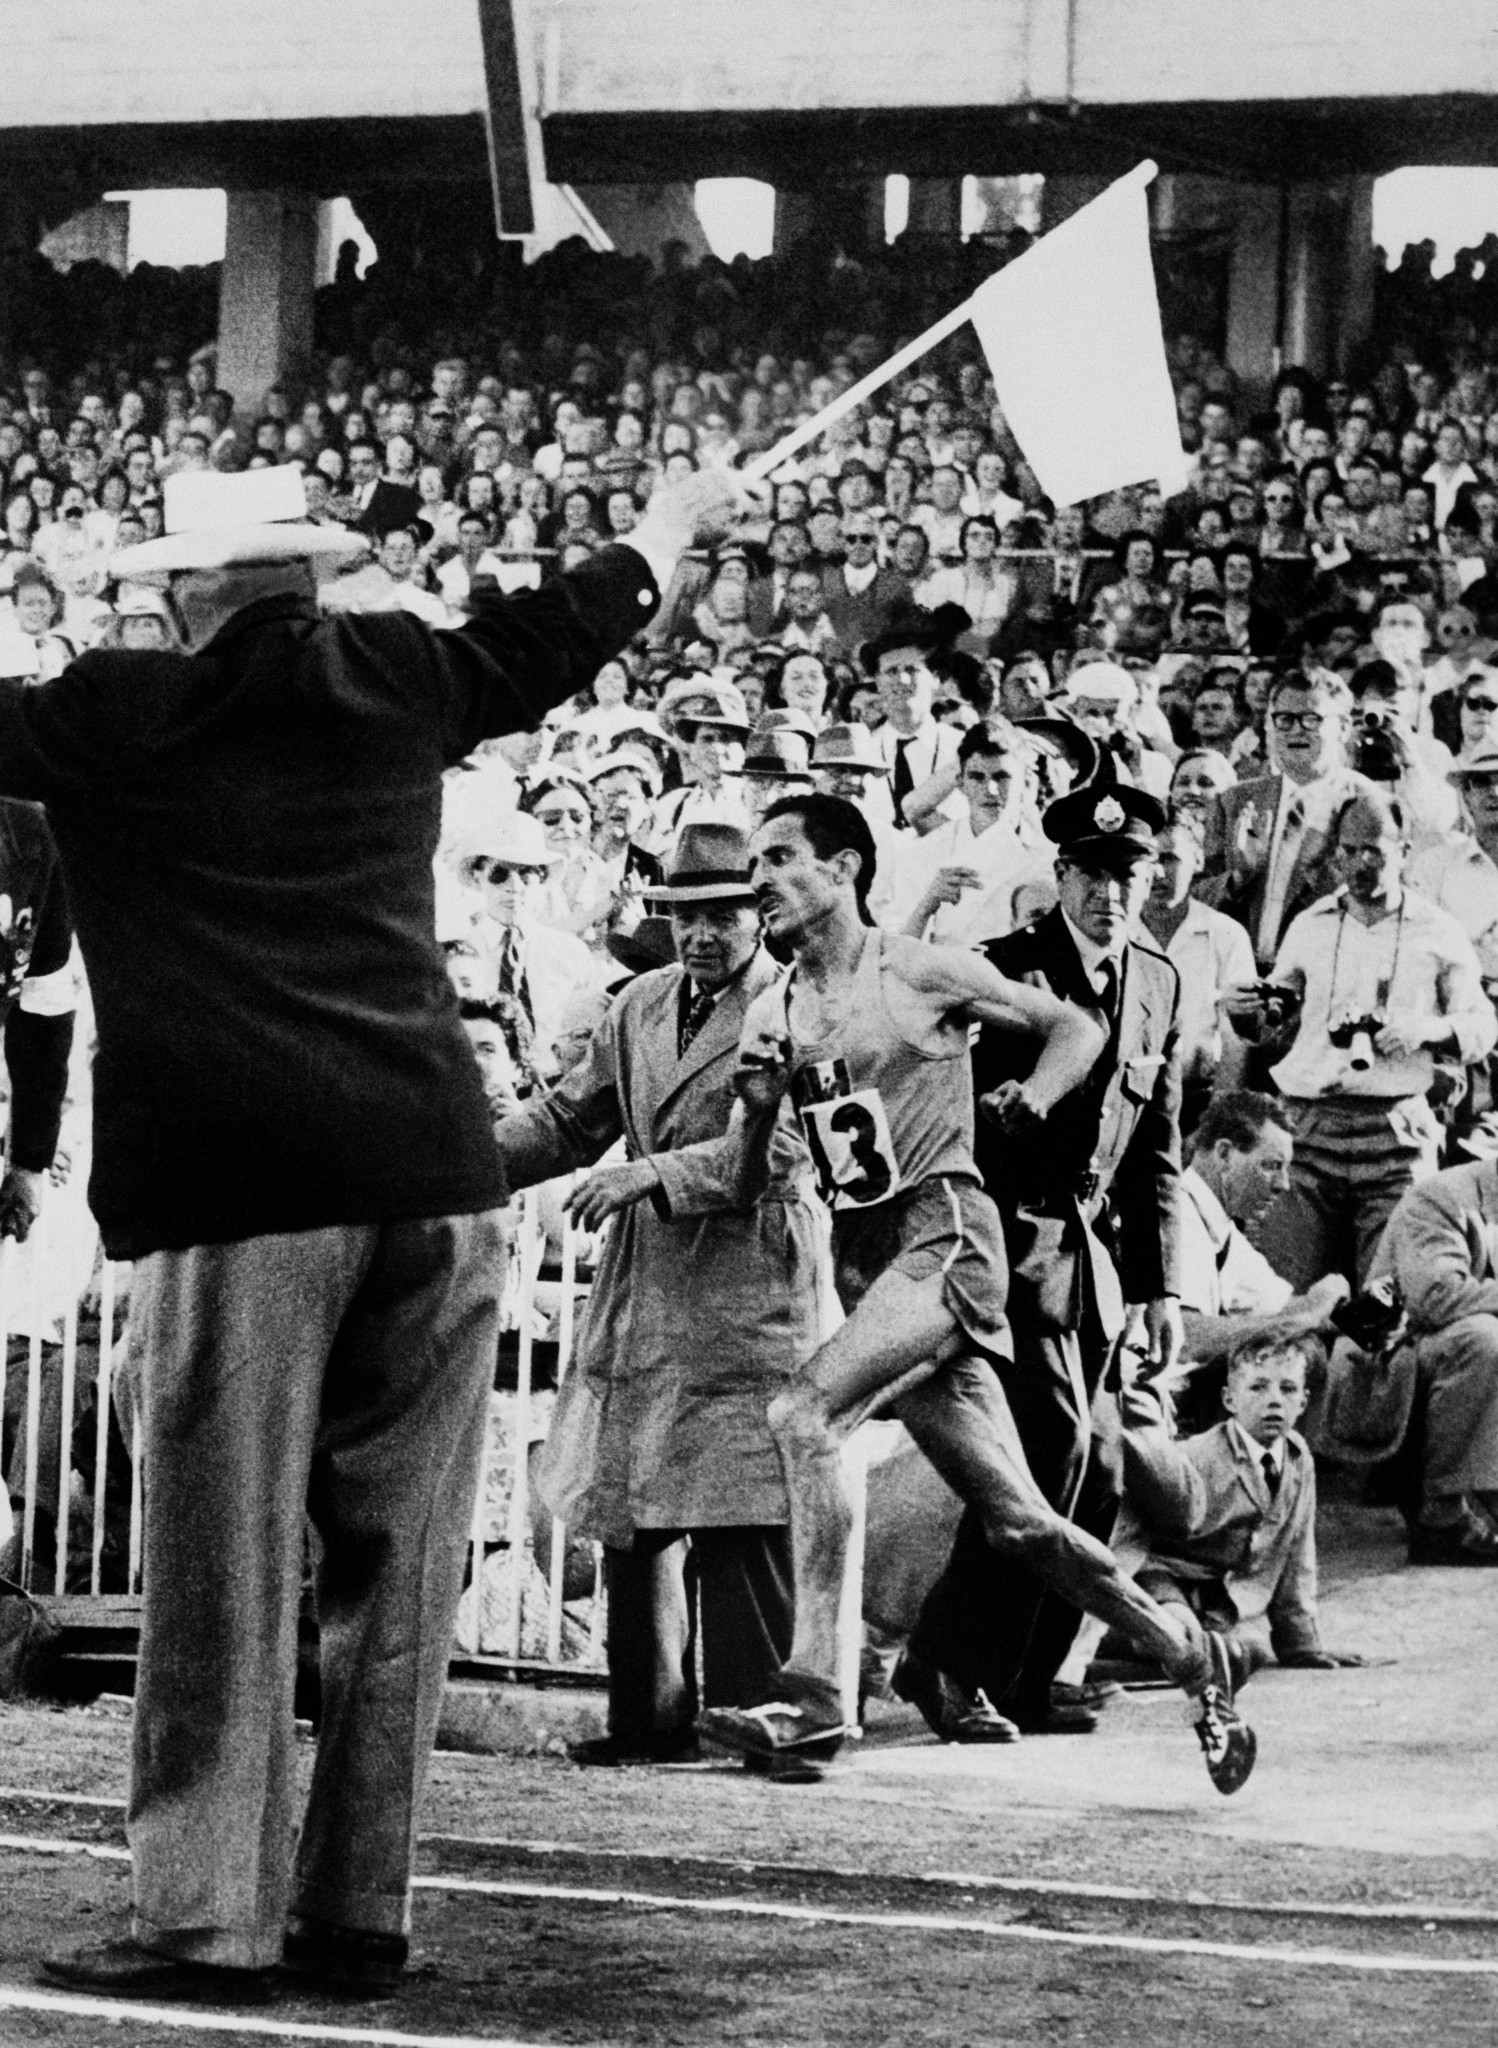 With Olympic glory awaiting, Alain Mimoun enters the Melbourne Cricket Ground in 1956 as 110,000 spectators make a noise he later compared to an 